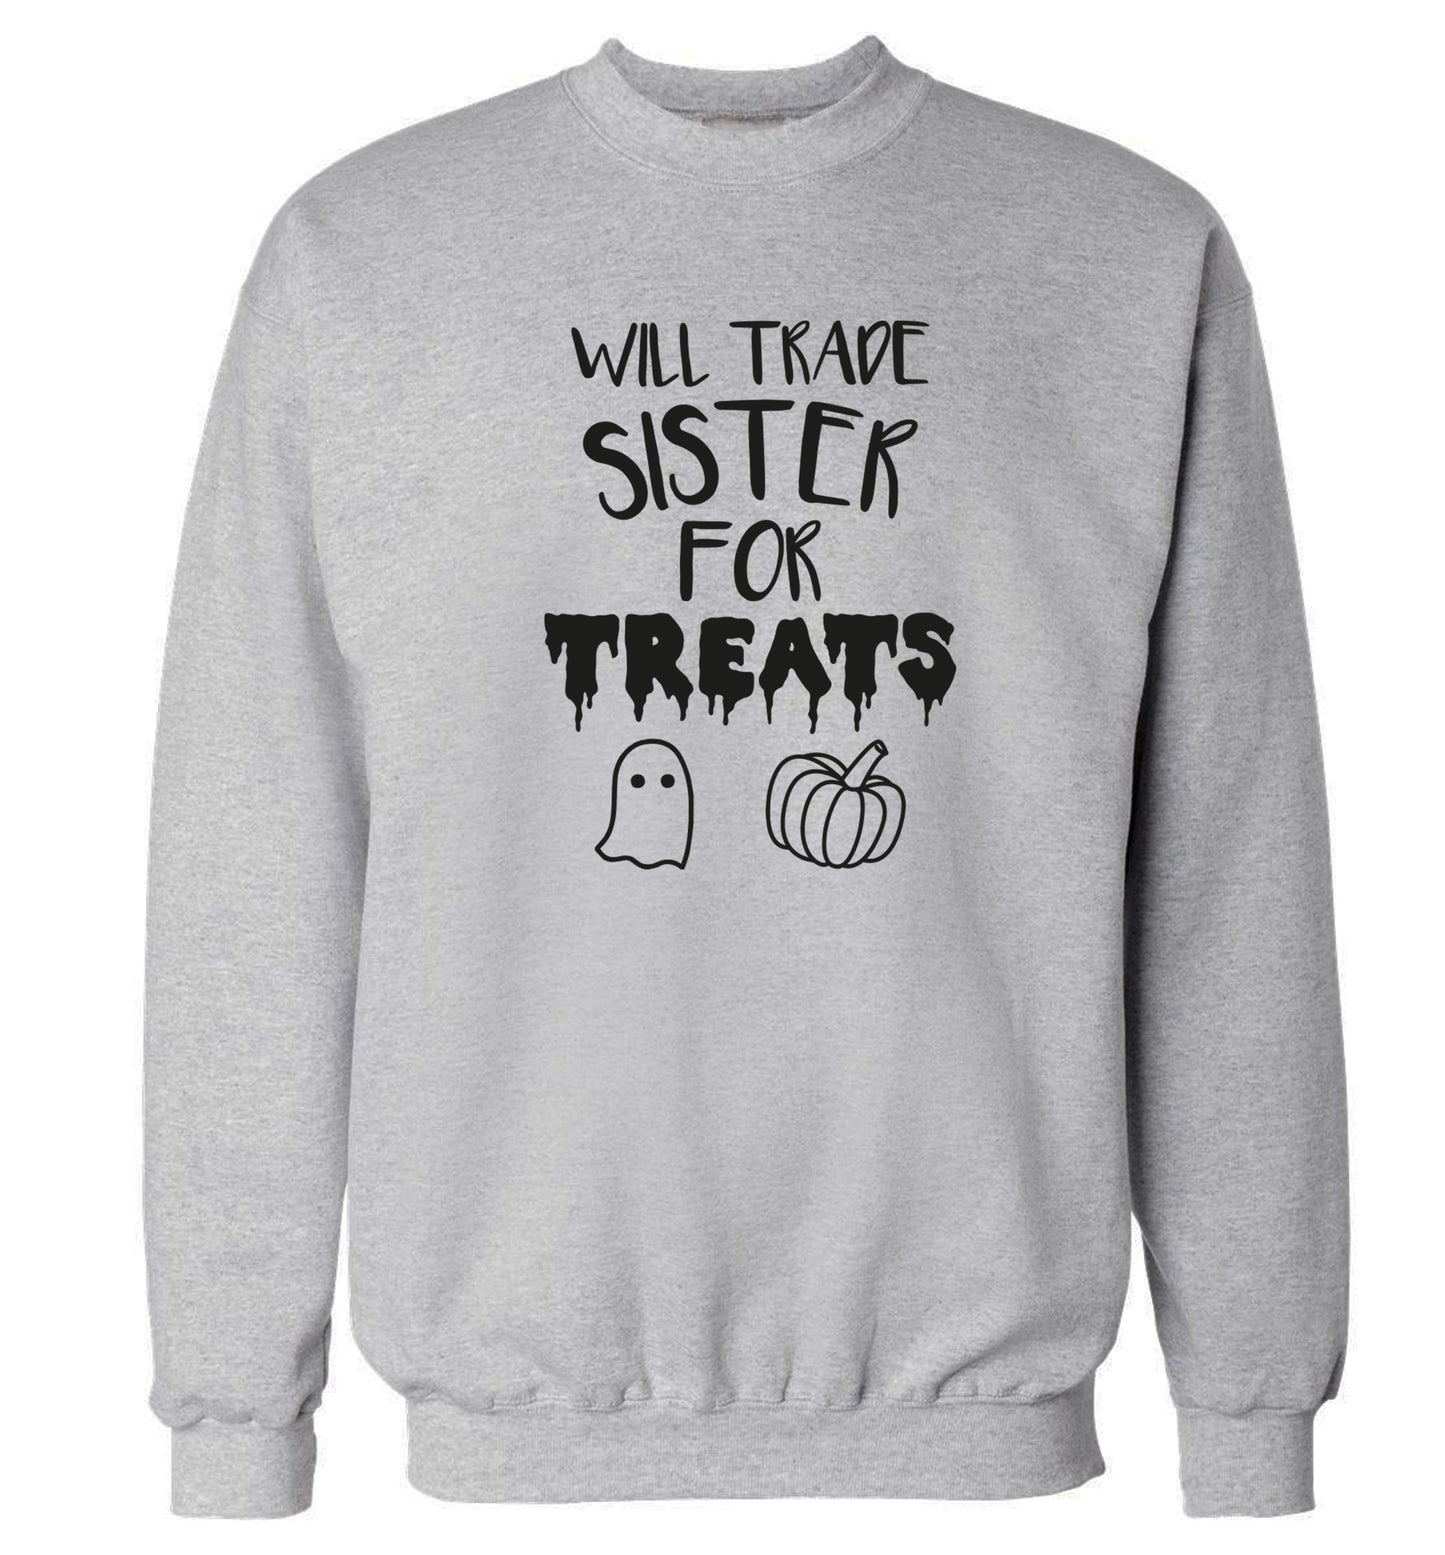 Will trade sister for treats Adult's unisex grey Sweater 2XL